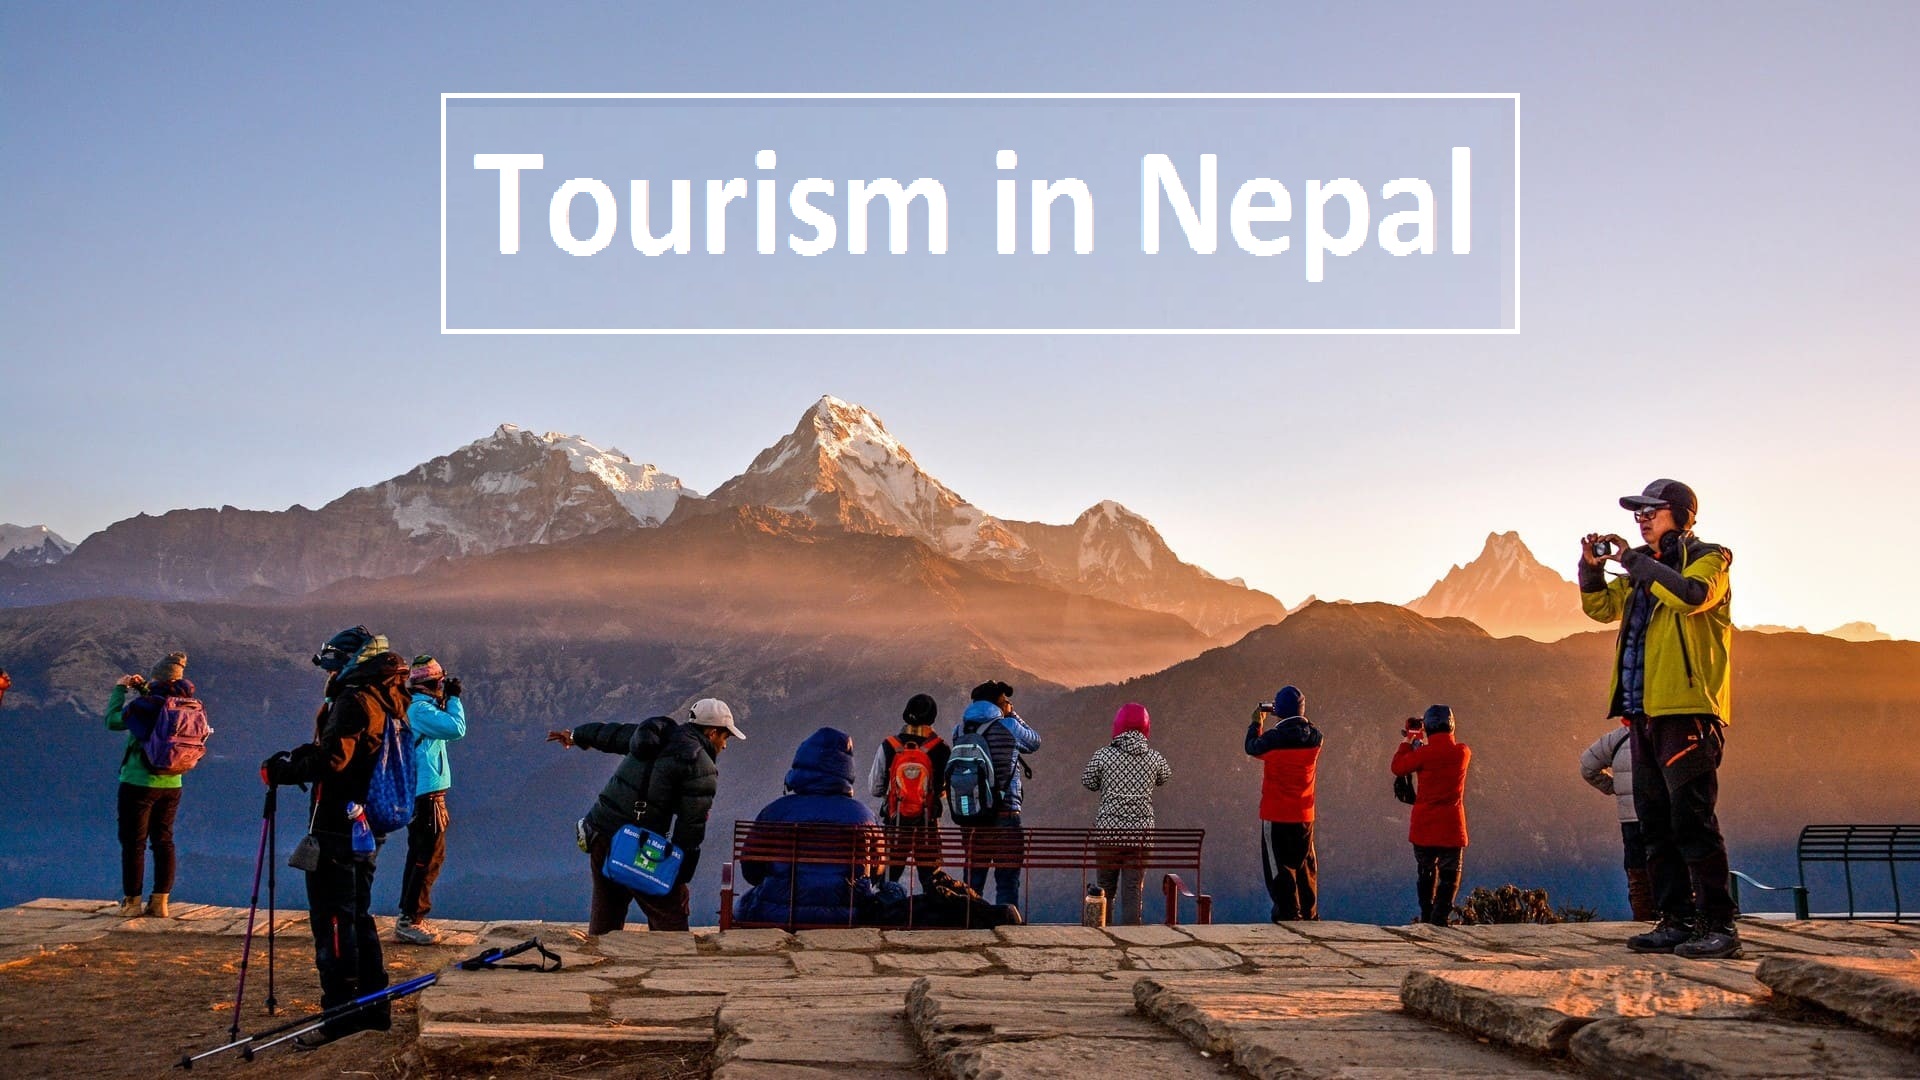 a case study on tourism in nepal